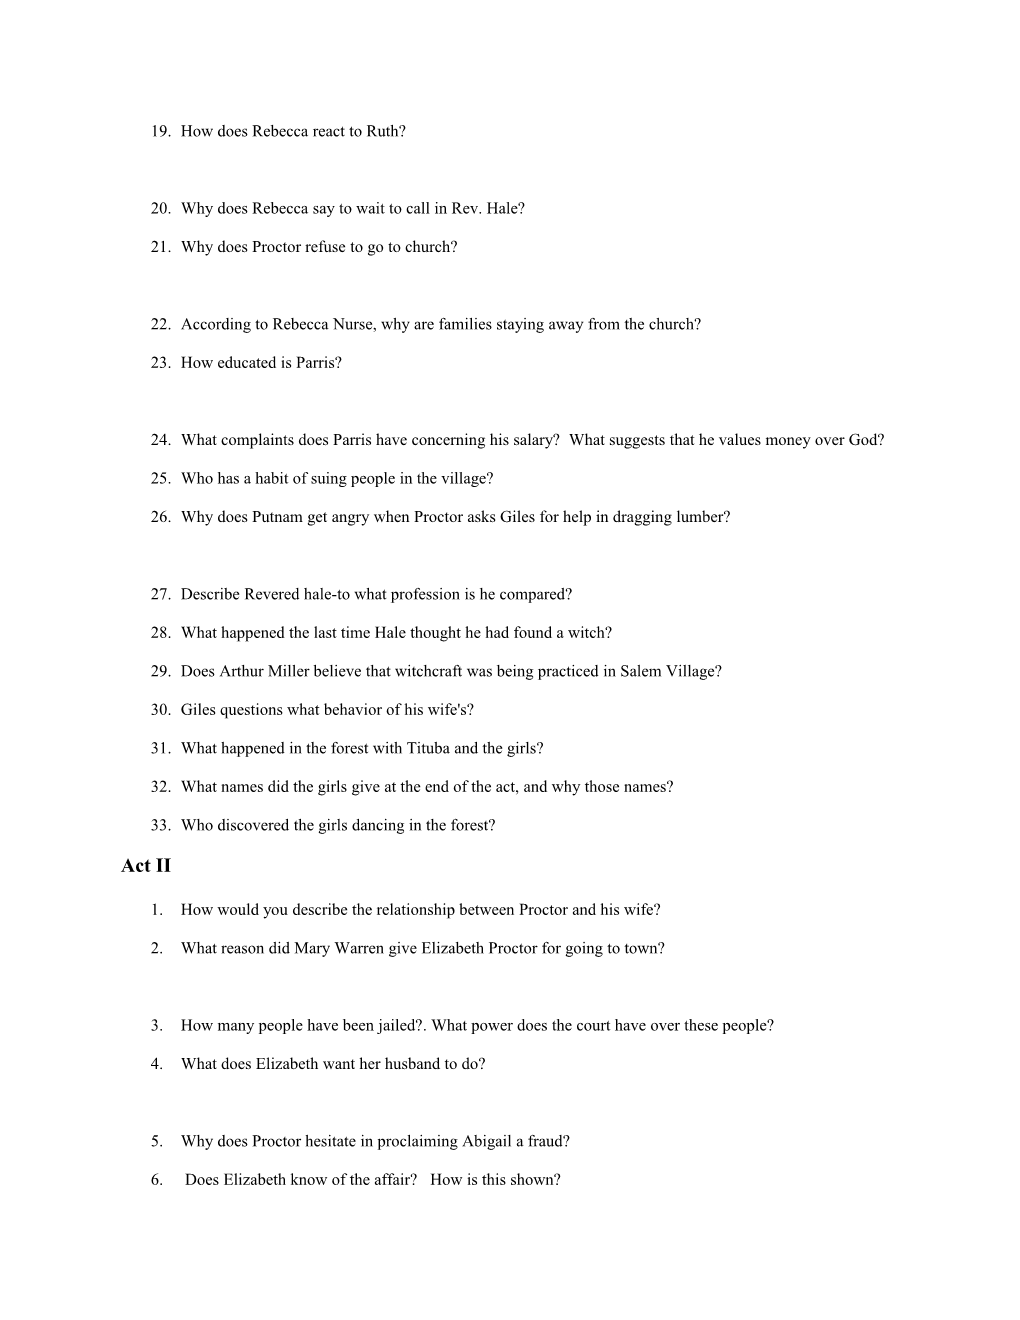 Study Questions for Arthur Miller's the Crucible